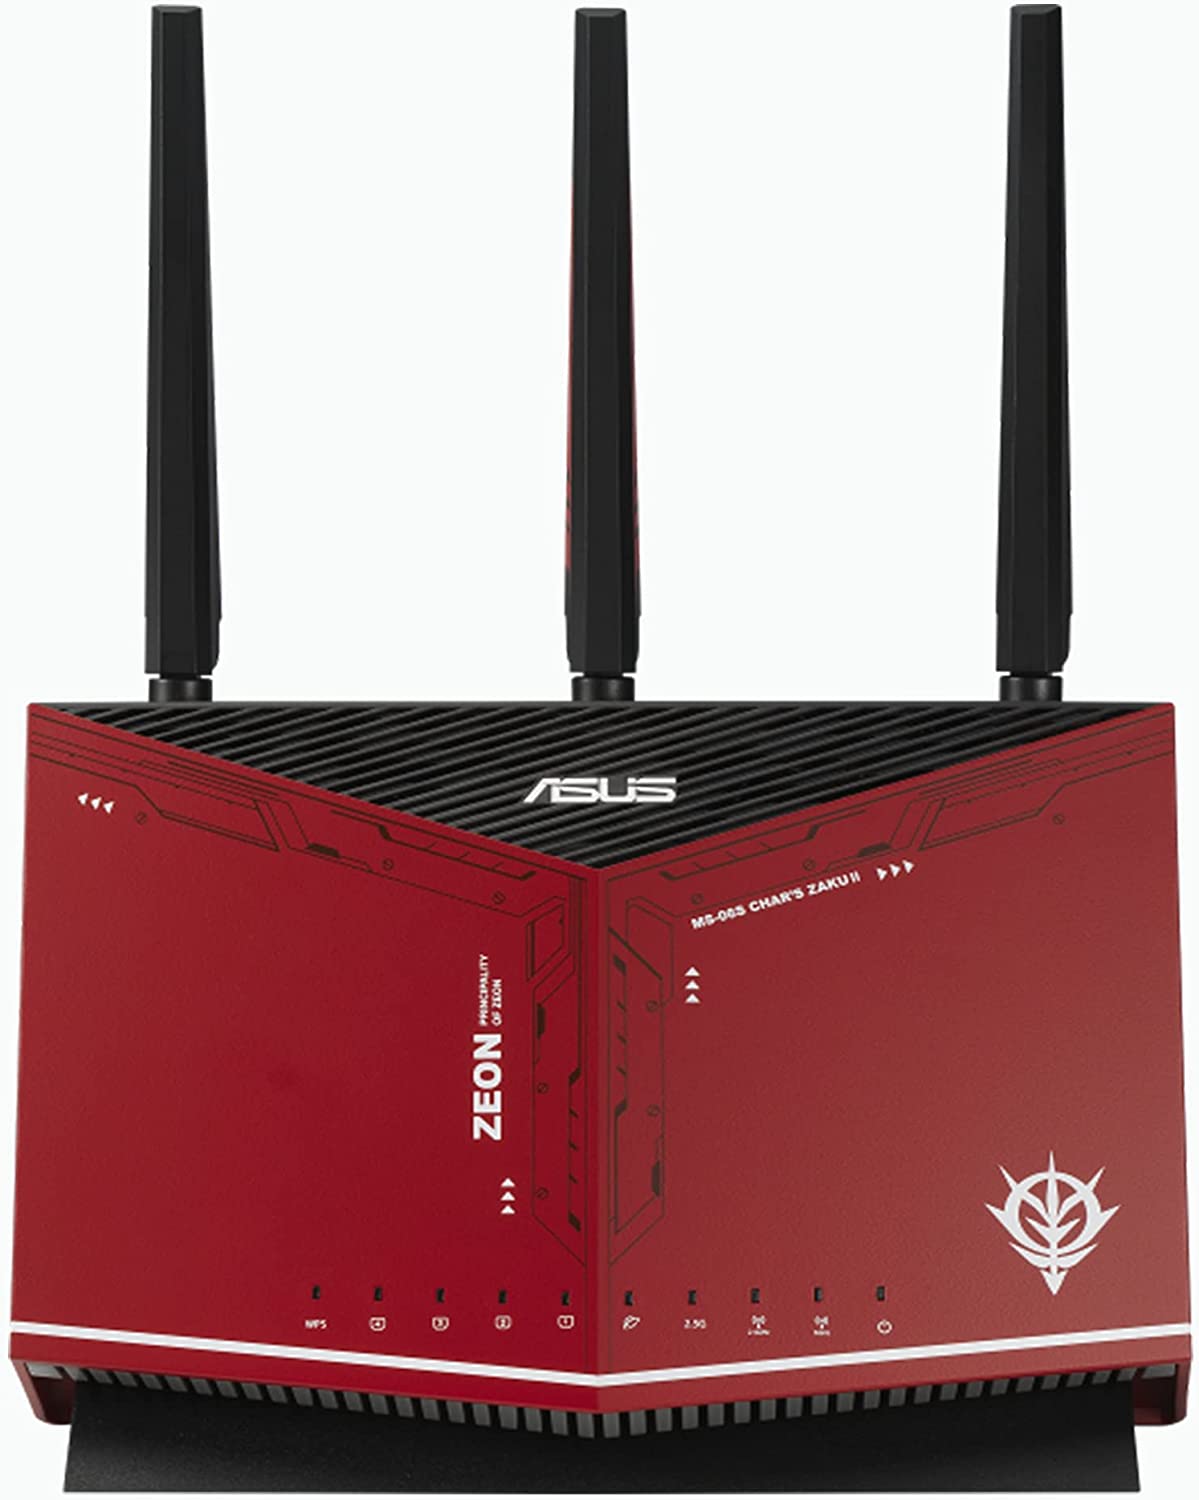 USED ASUS AX5700 WiFi 6 Gaming Router (RT-AX86U Zaku II Edition) – Dual Band Gigabit Wireless Internet Router $183.53